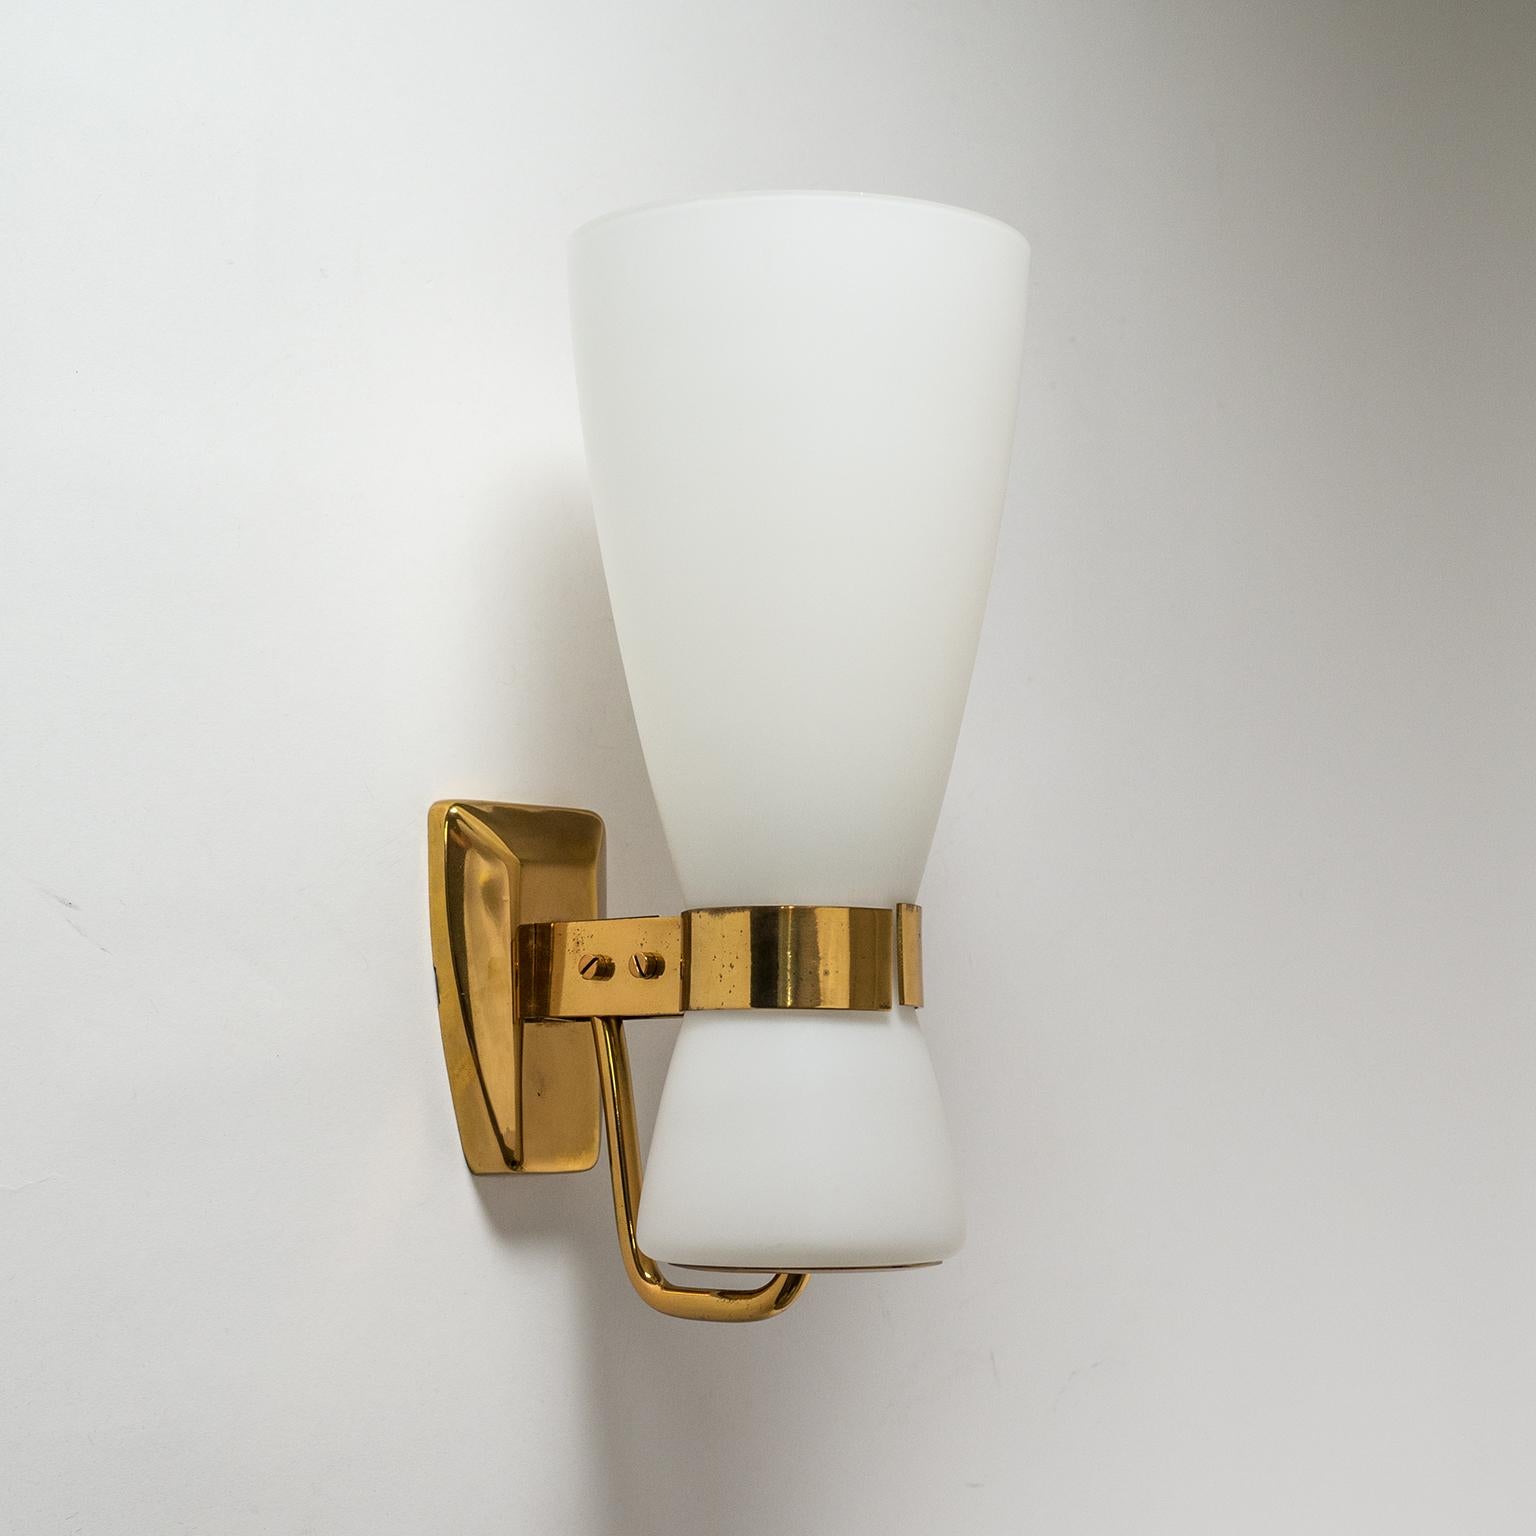 Elegant satin glass and brass wall light by Stilnovo, 1950s. The large tapered glass diffuser is held in place by two brass brackets. One original brass and ceramic E27 socket with new wiring. Original Stilnovo label.